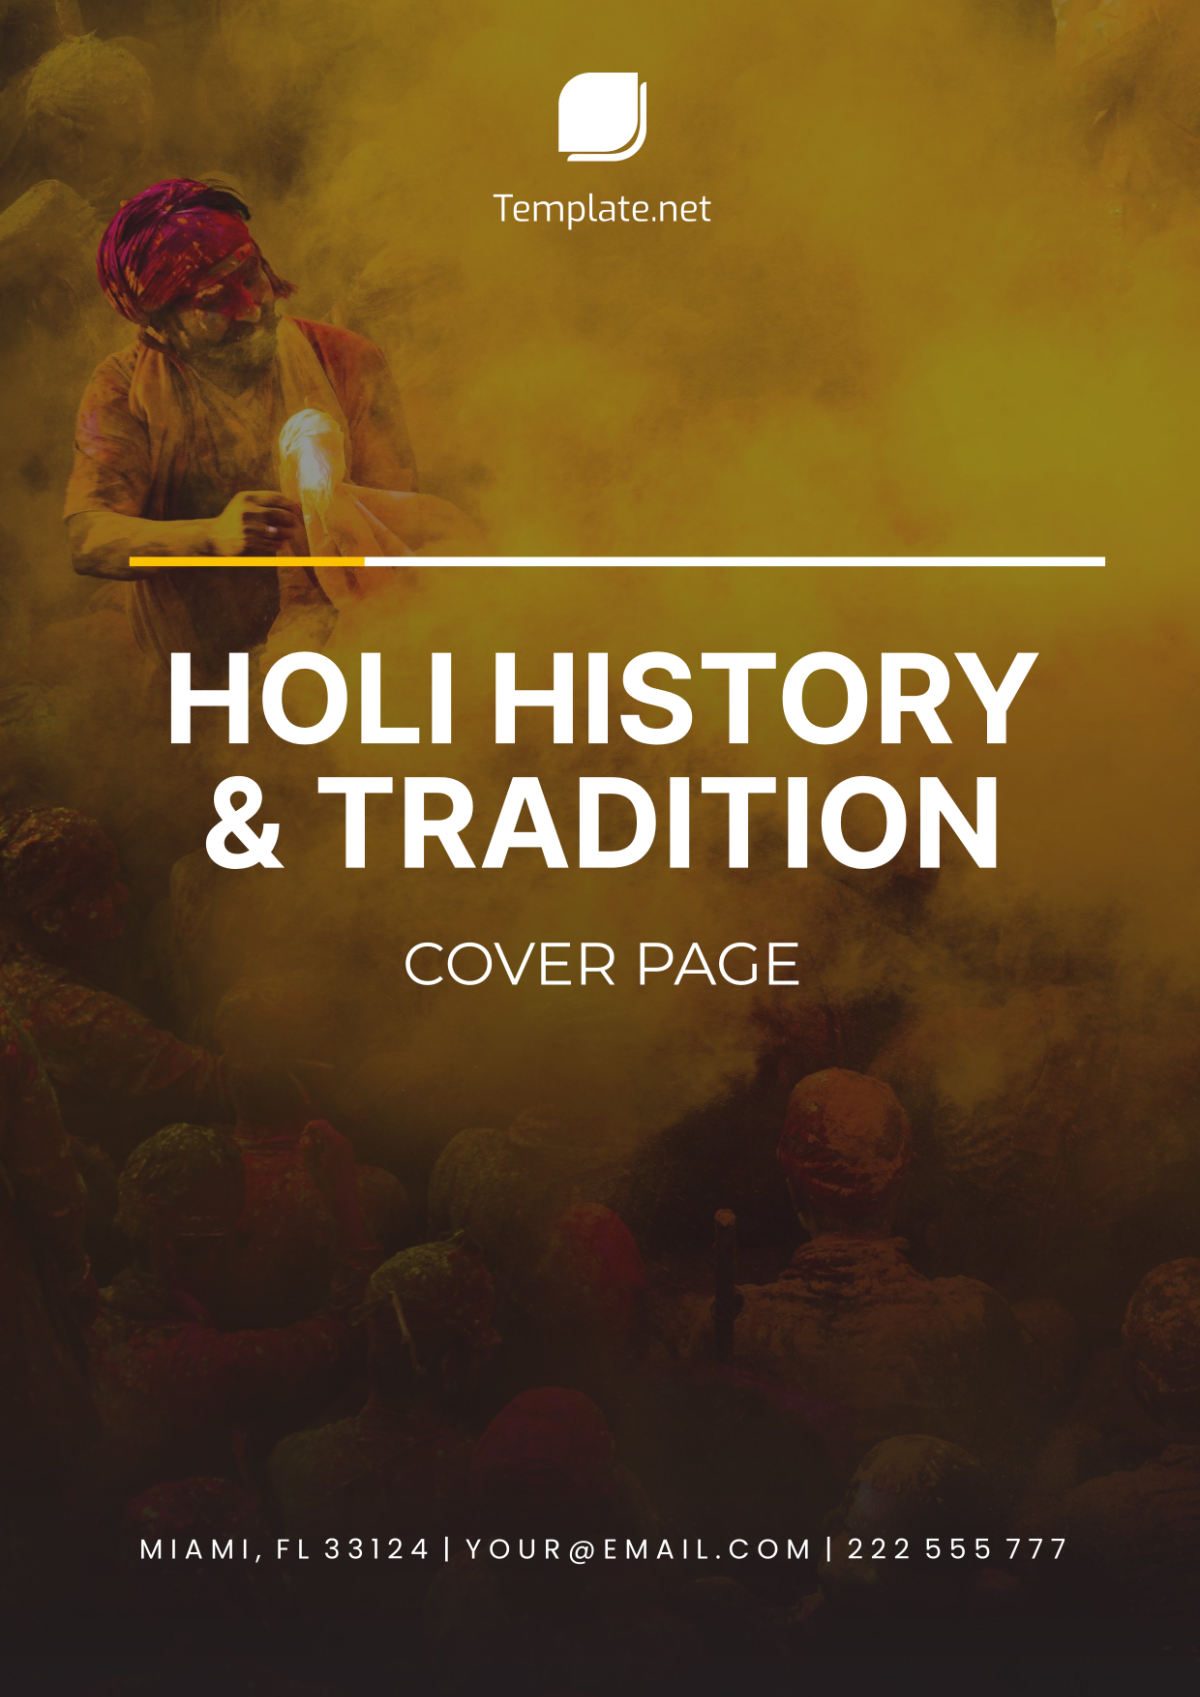 Holi History & Tradition Cover Page